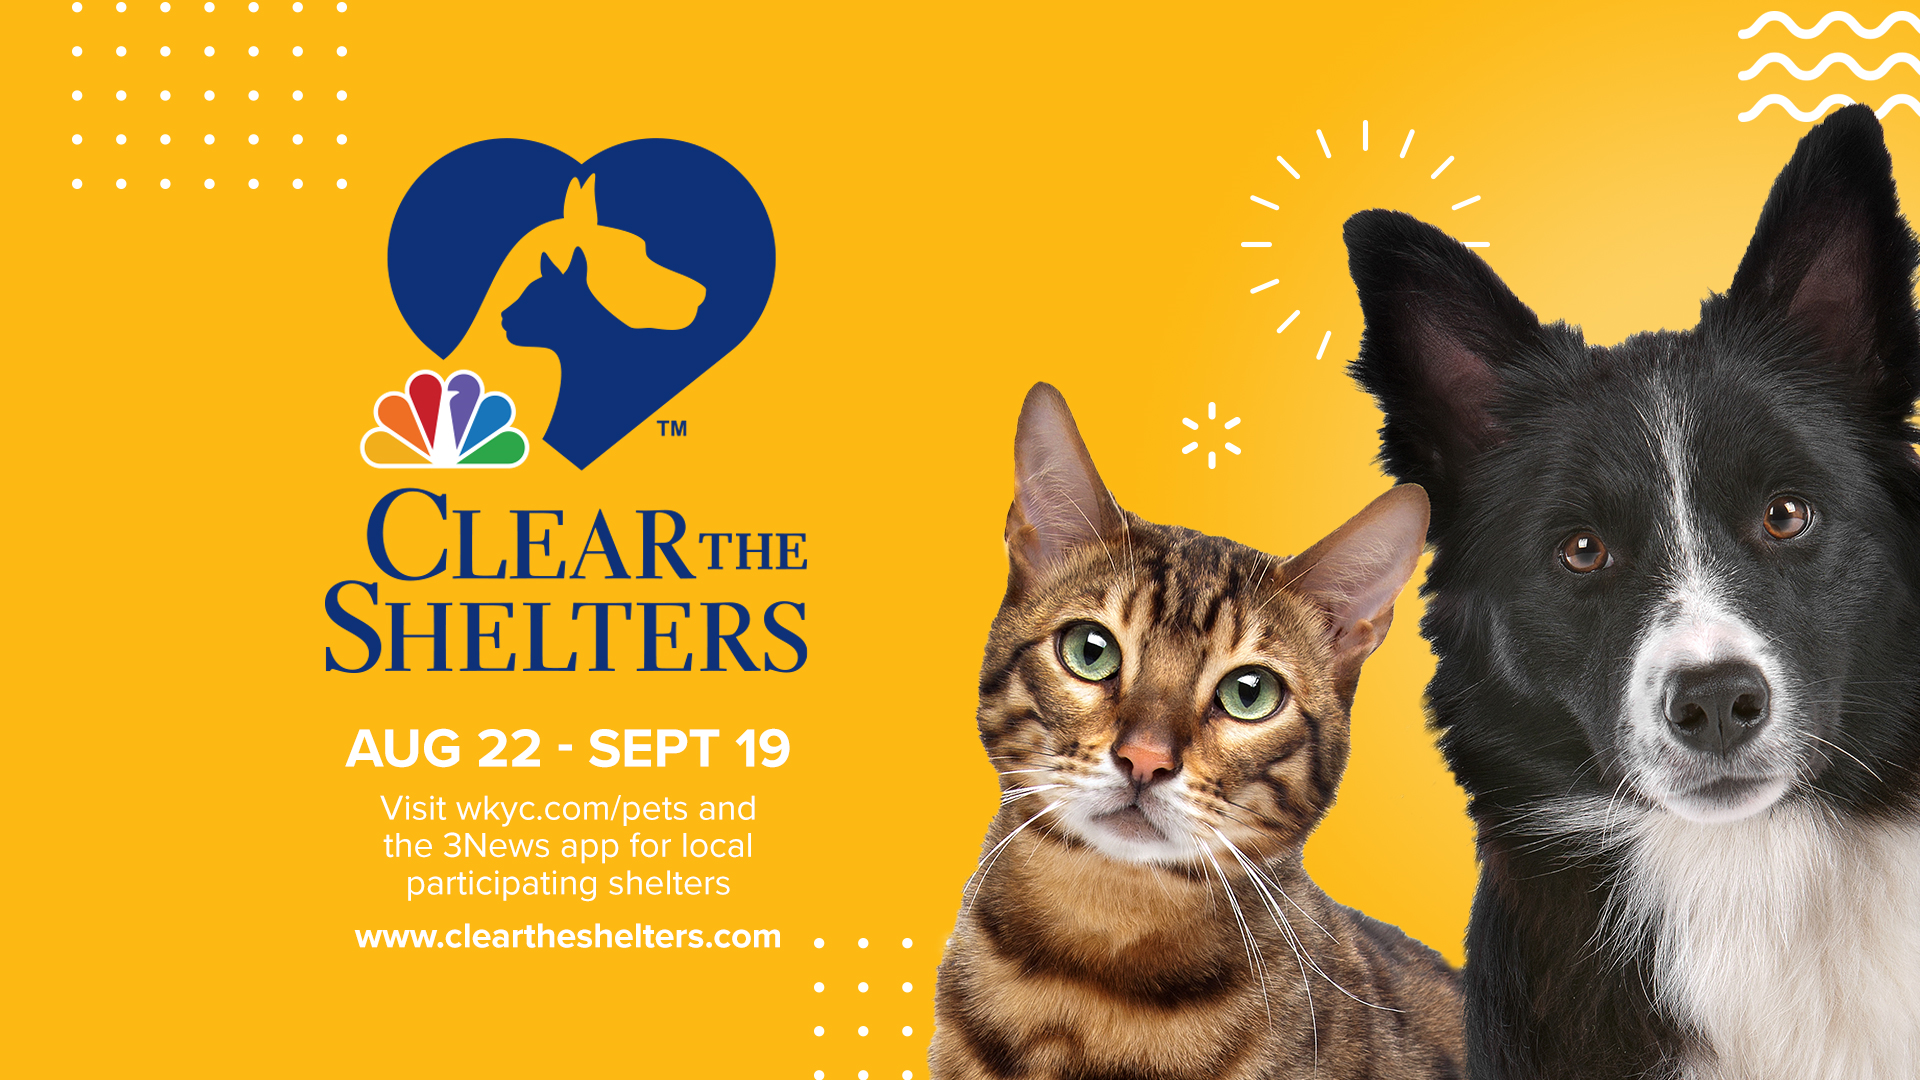 Clear The Shelters runs through September 19th.